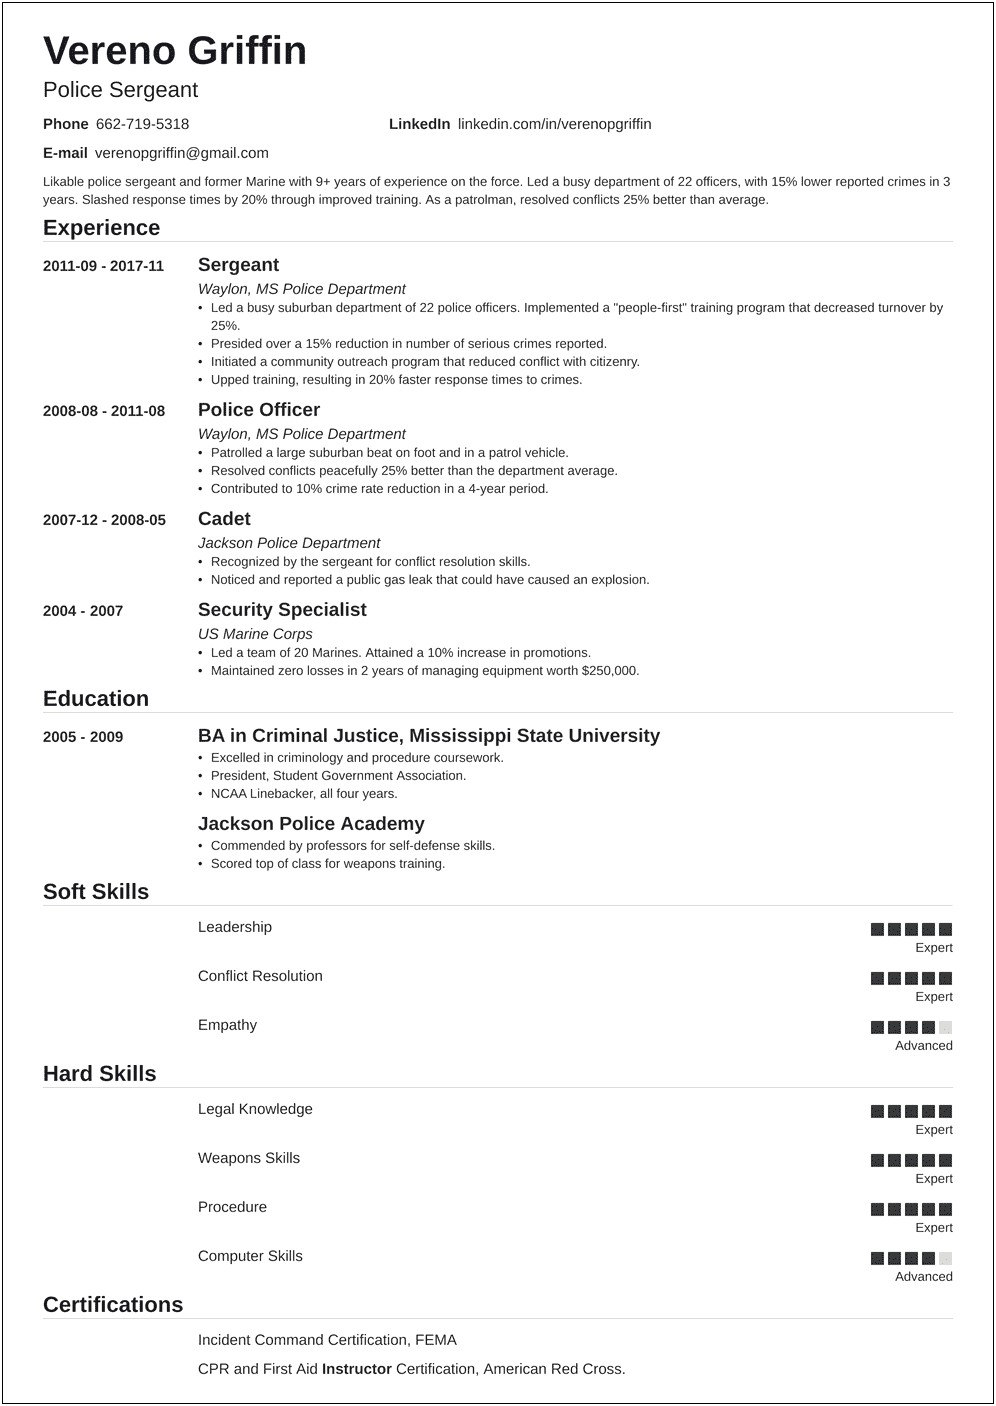 Description Of Work Experience Resume Police Officer Example